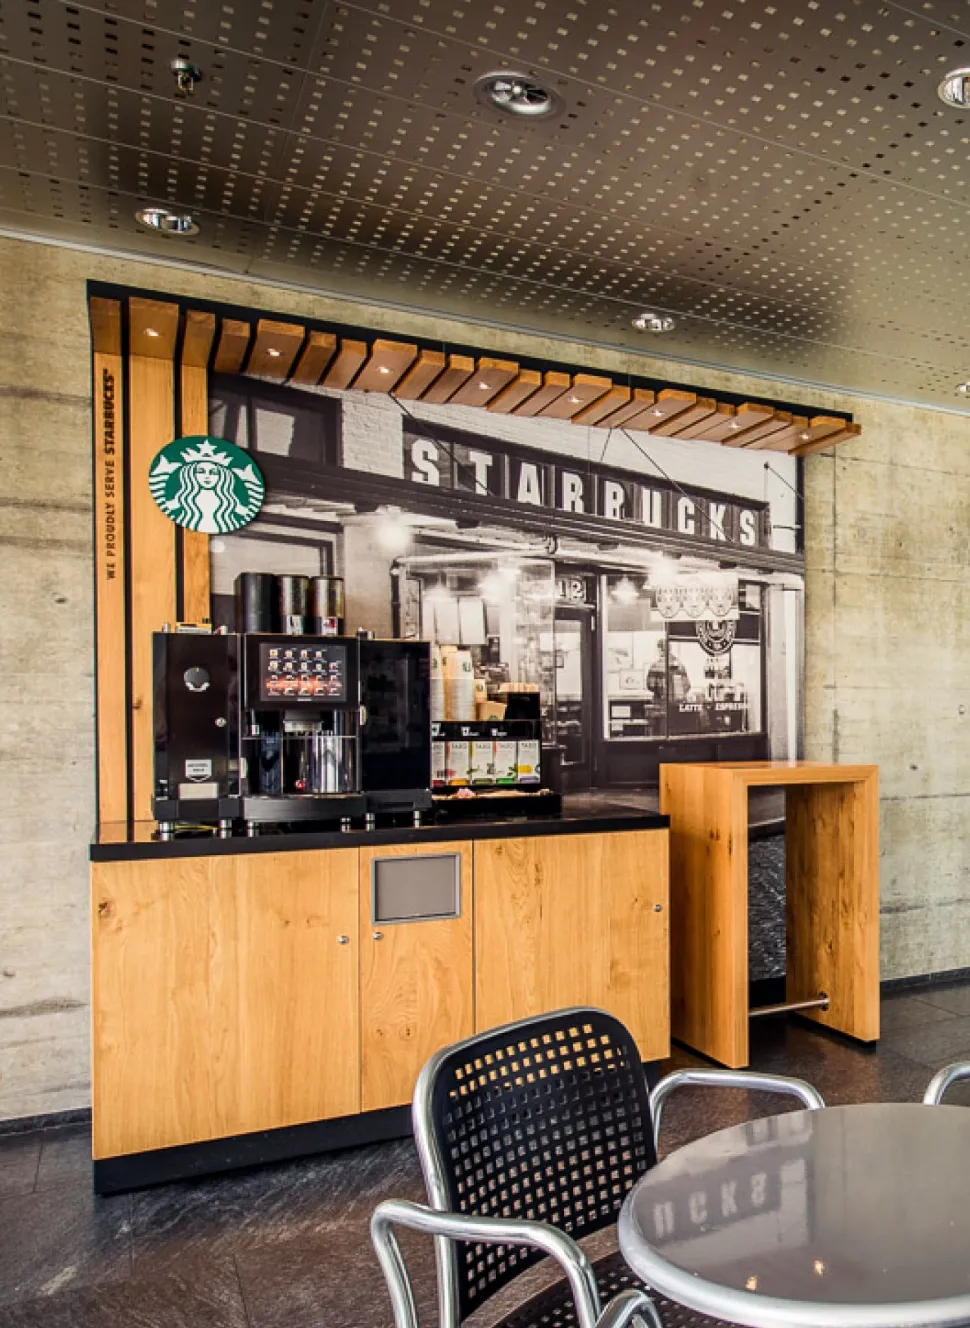 Starbucks® Coffee Machines for Offices